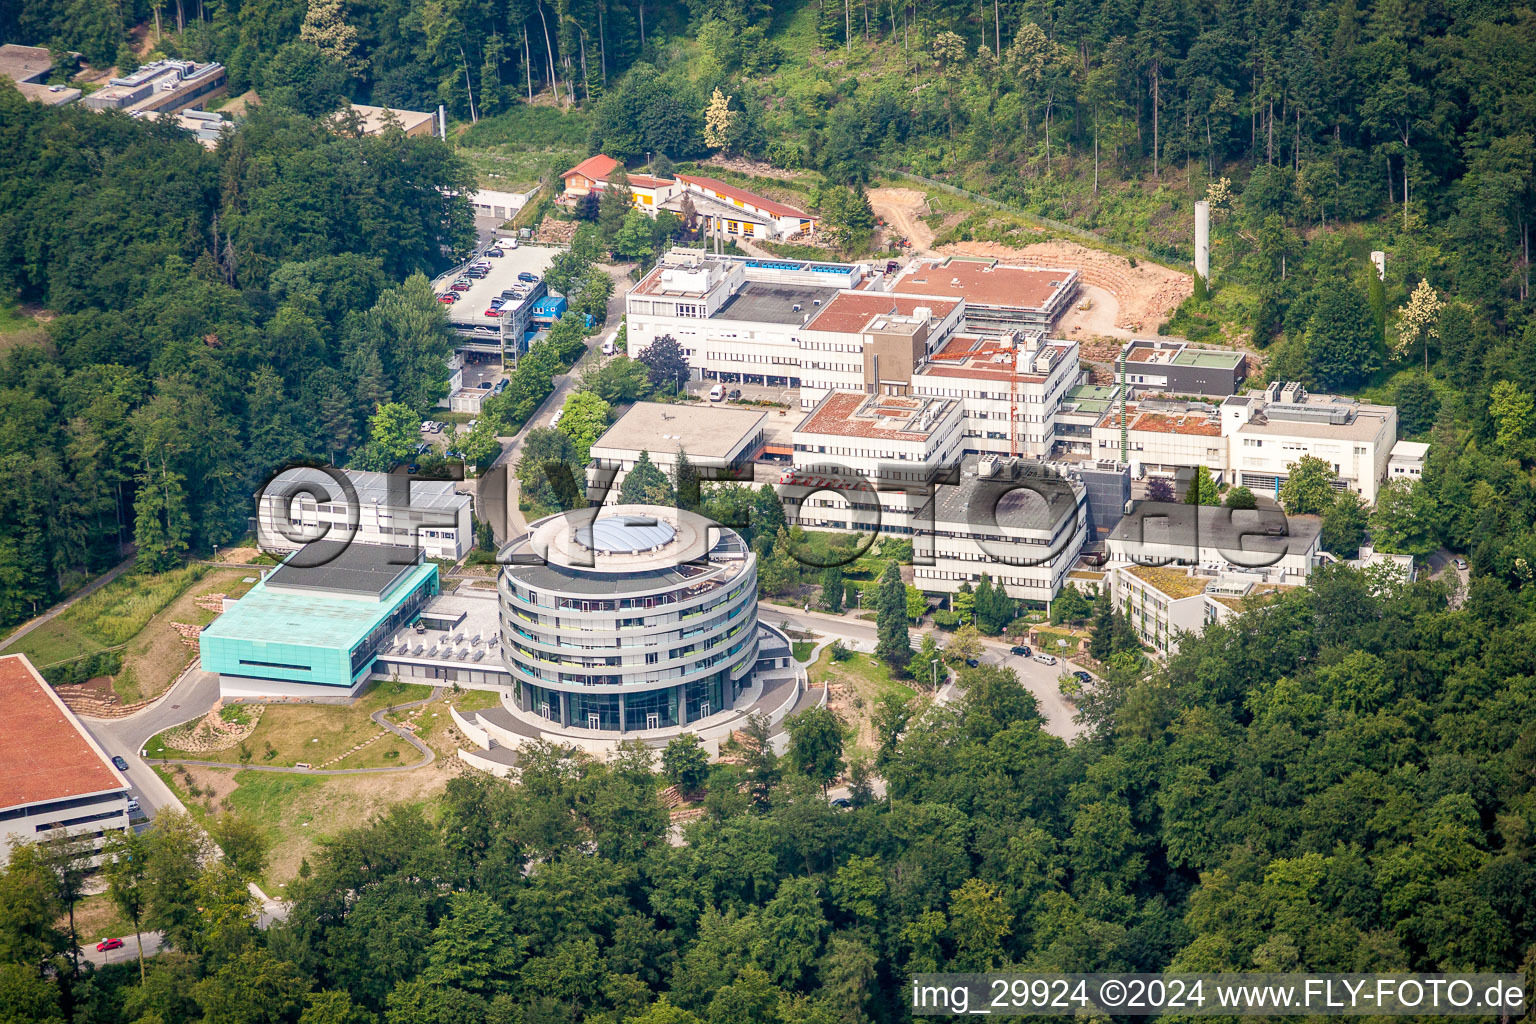 Aerial view of Research building and office complex of EMBL Heidelberg in the district Rohrbach-Bierhelderhof in Heidelberg in the state Baden-Wurttemberg, Germany